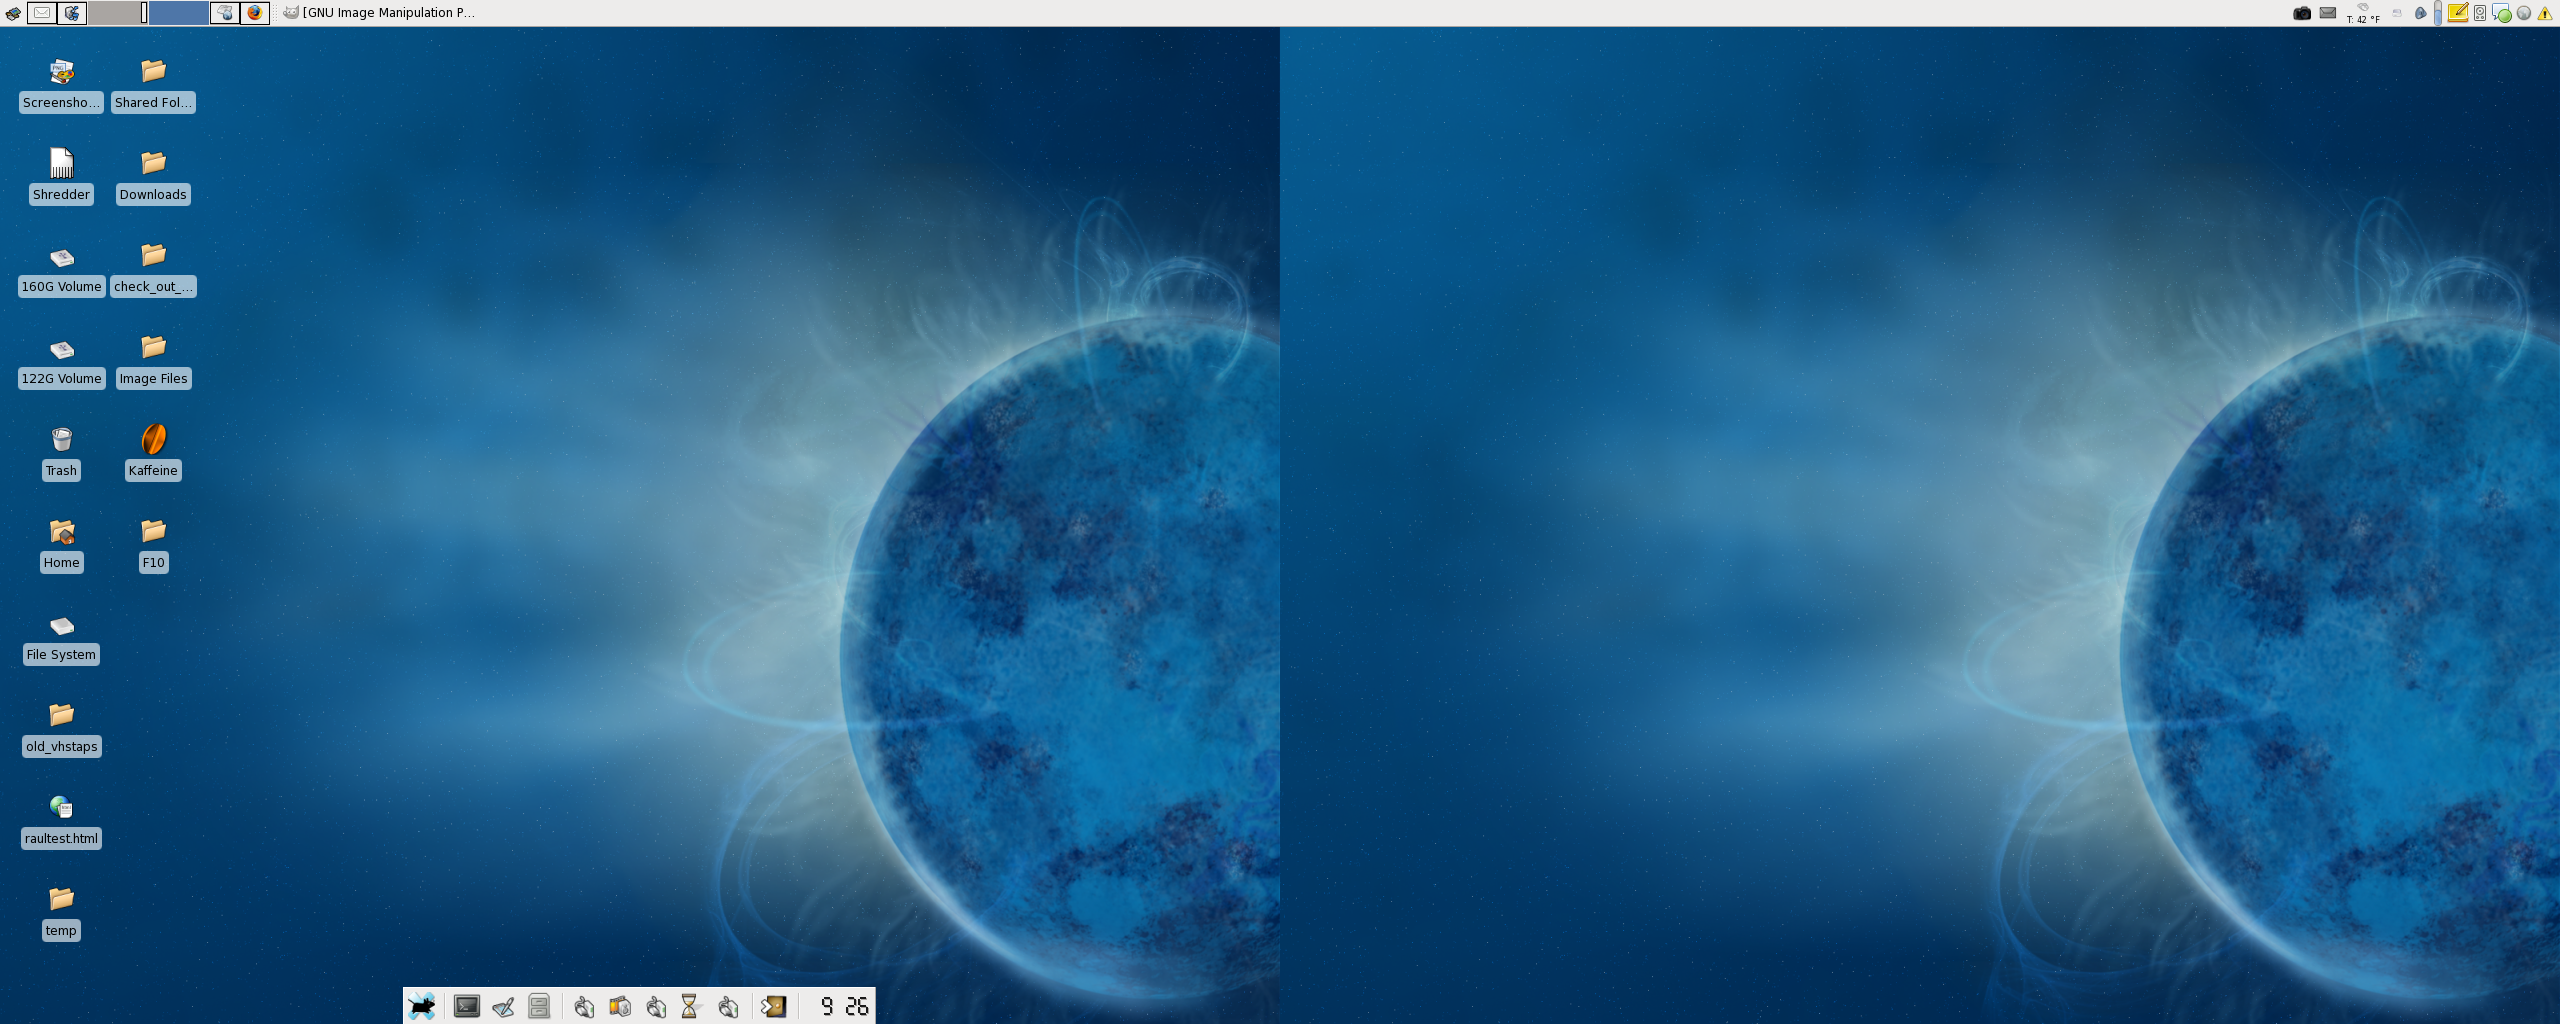 Xfce 2014 and Earlier